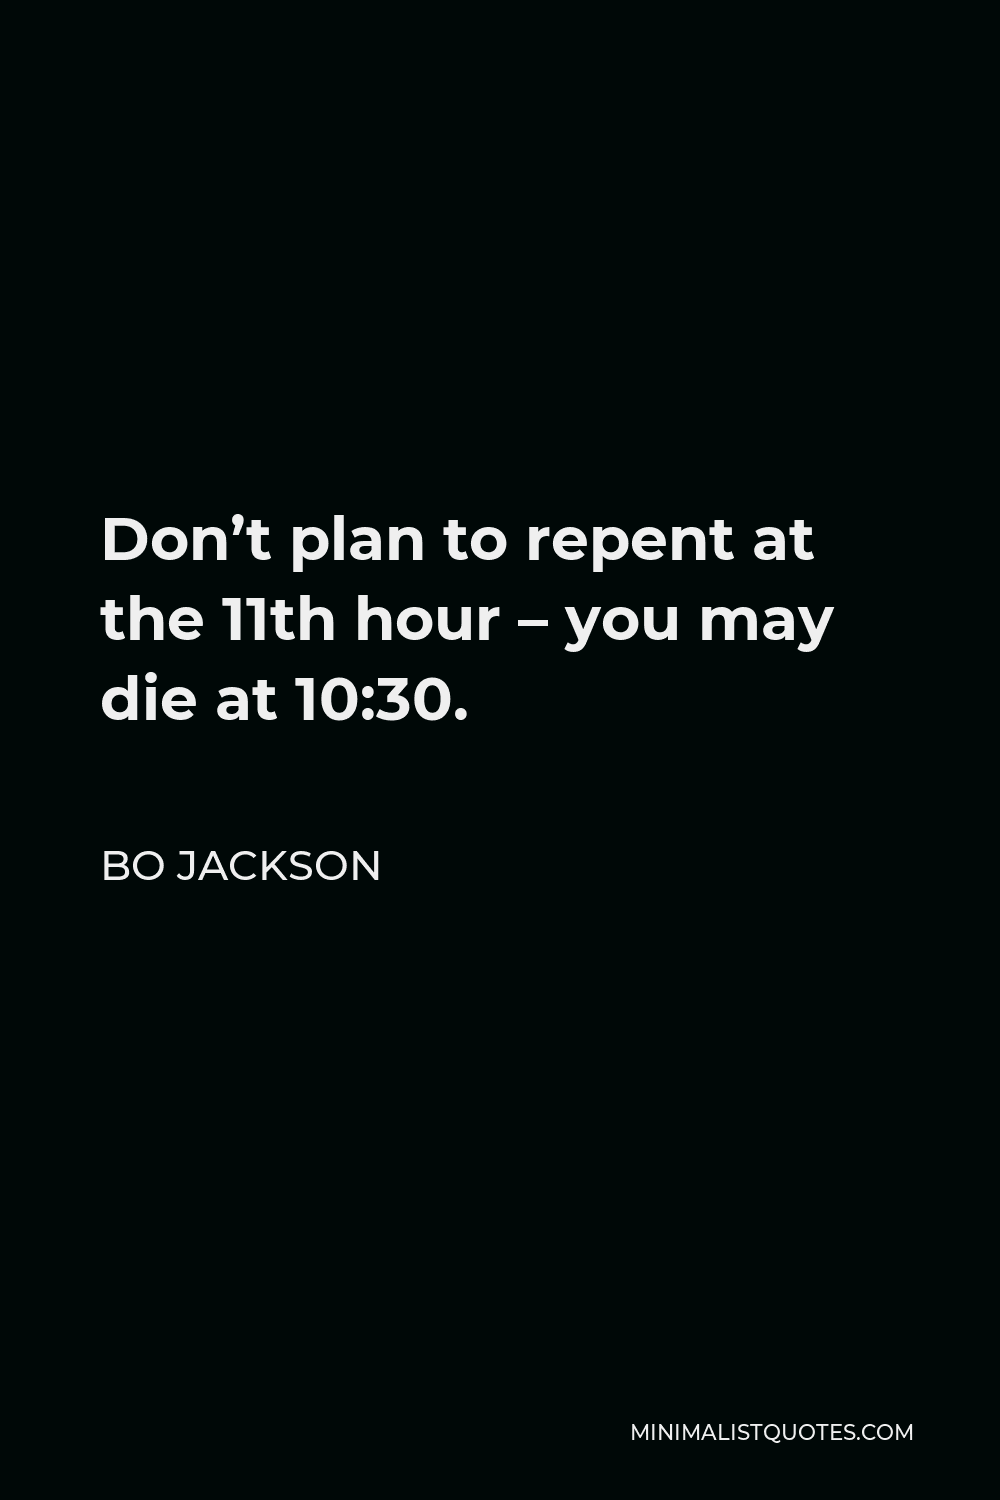 Bo Jackson Quote - Don’t plan to repent at the 11th hour – you may die at 10:30.